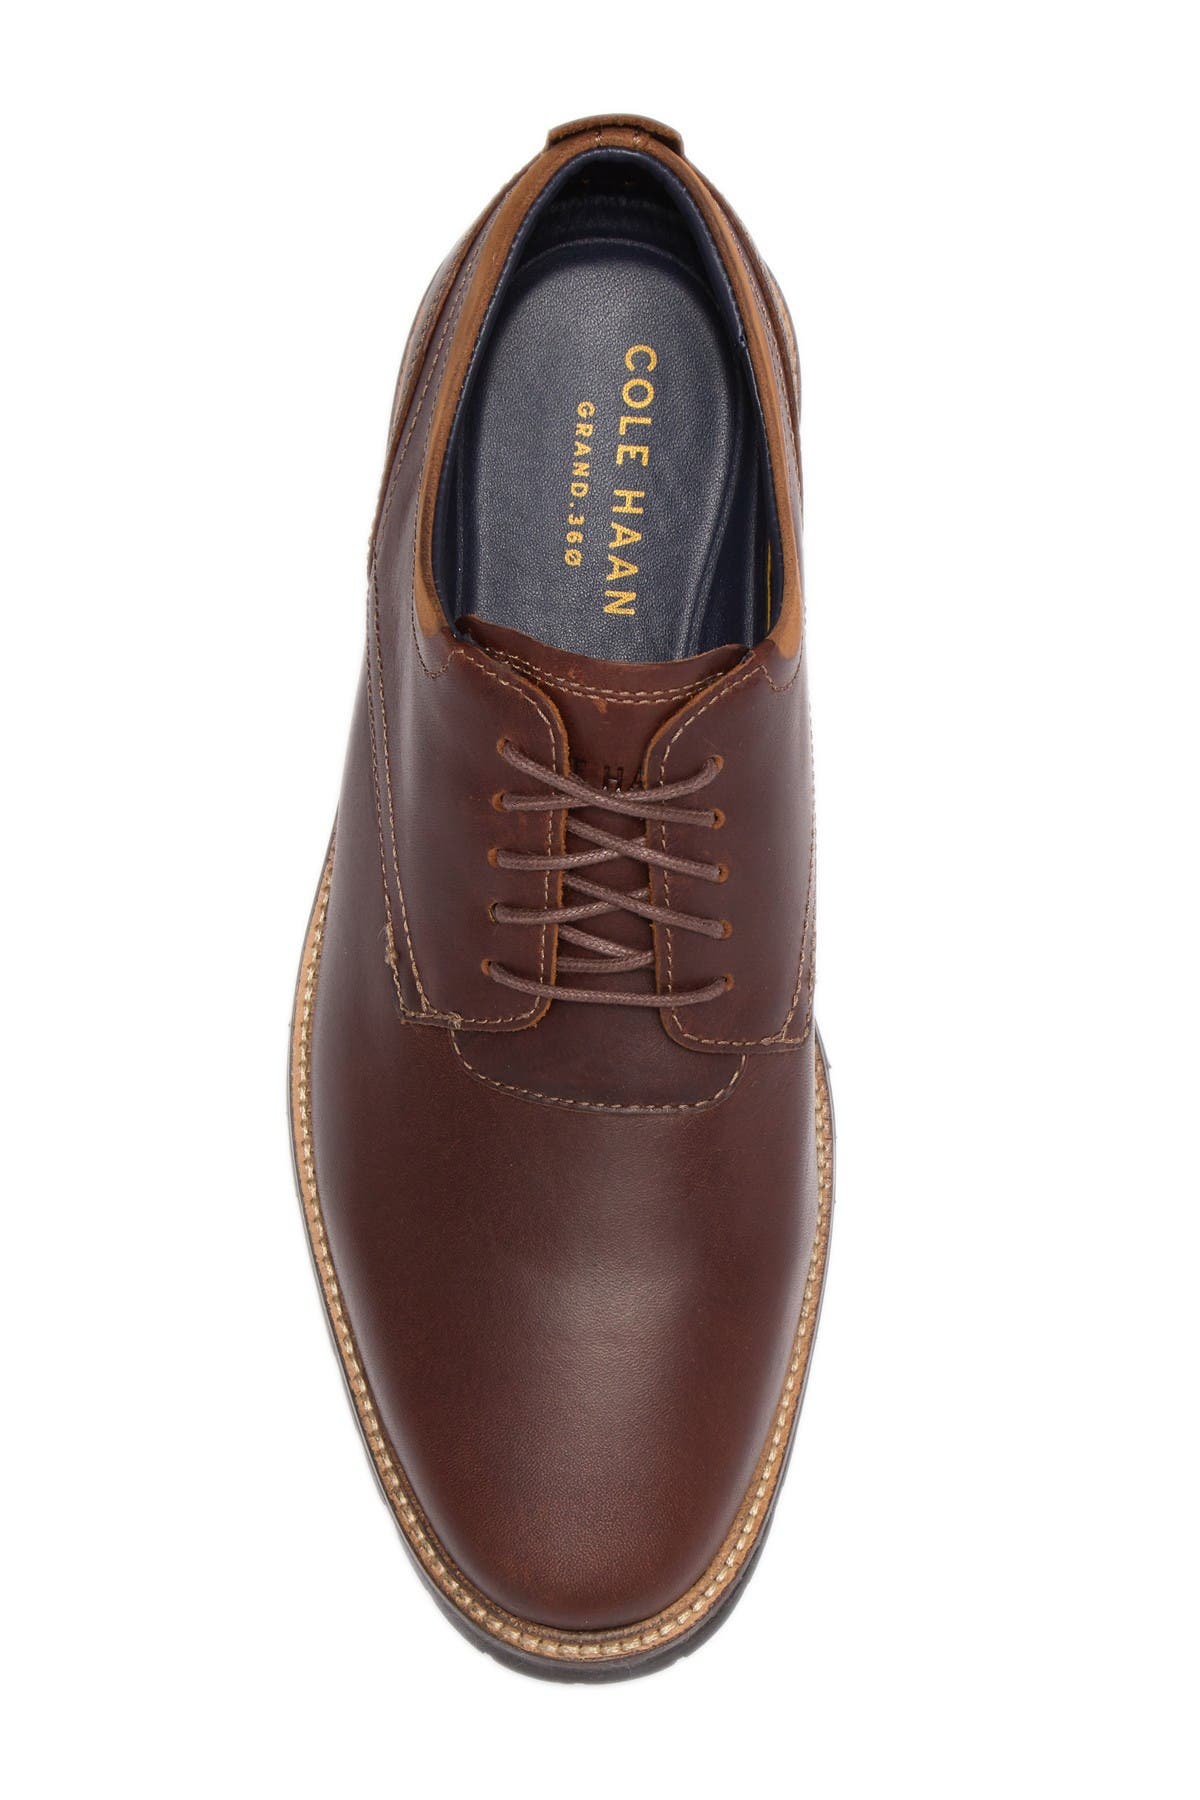 cole haan ripley grand oxfords